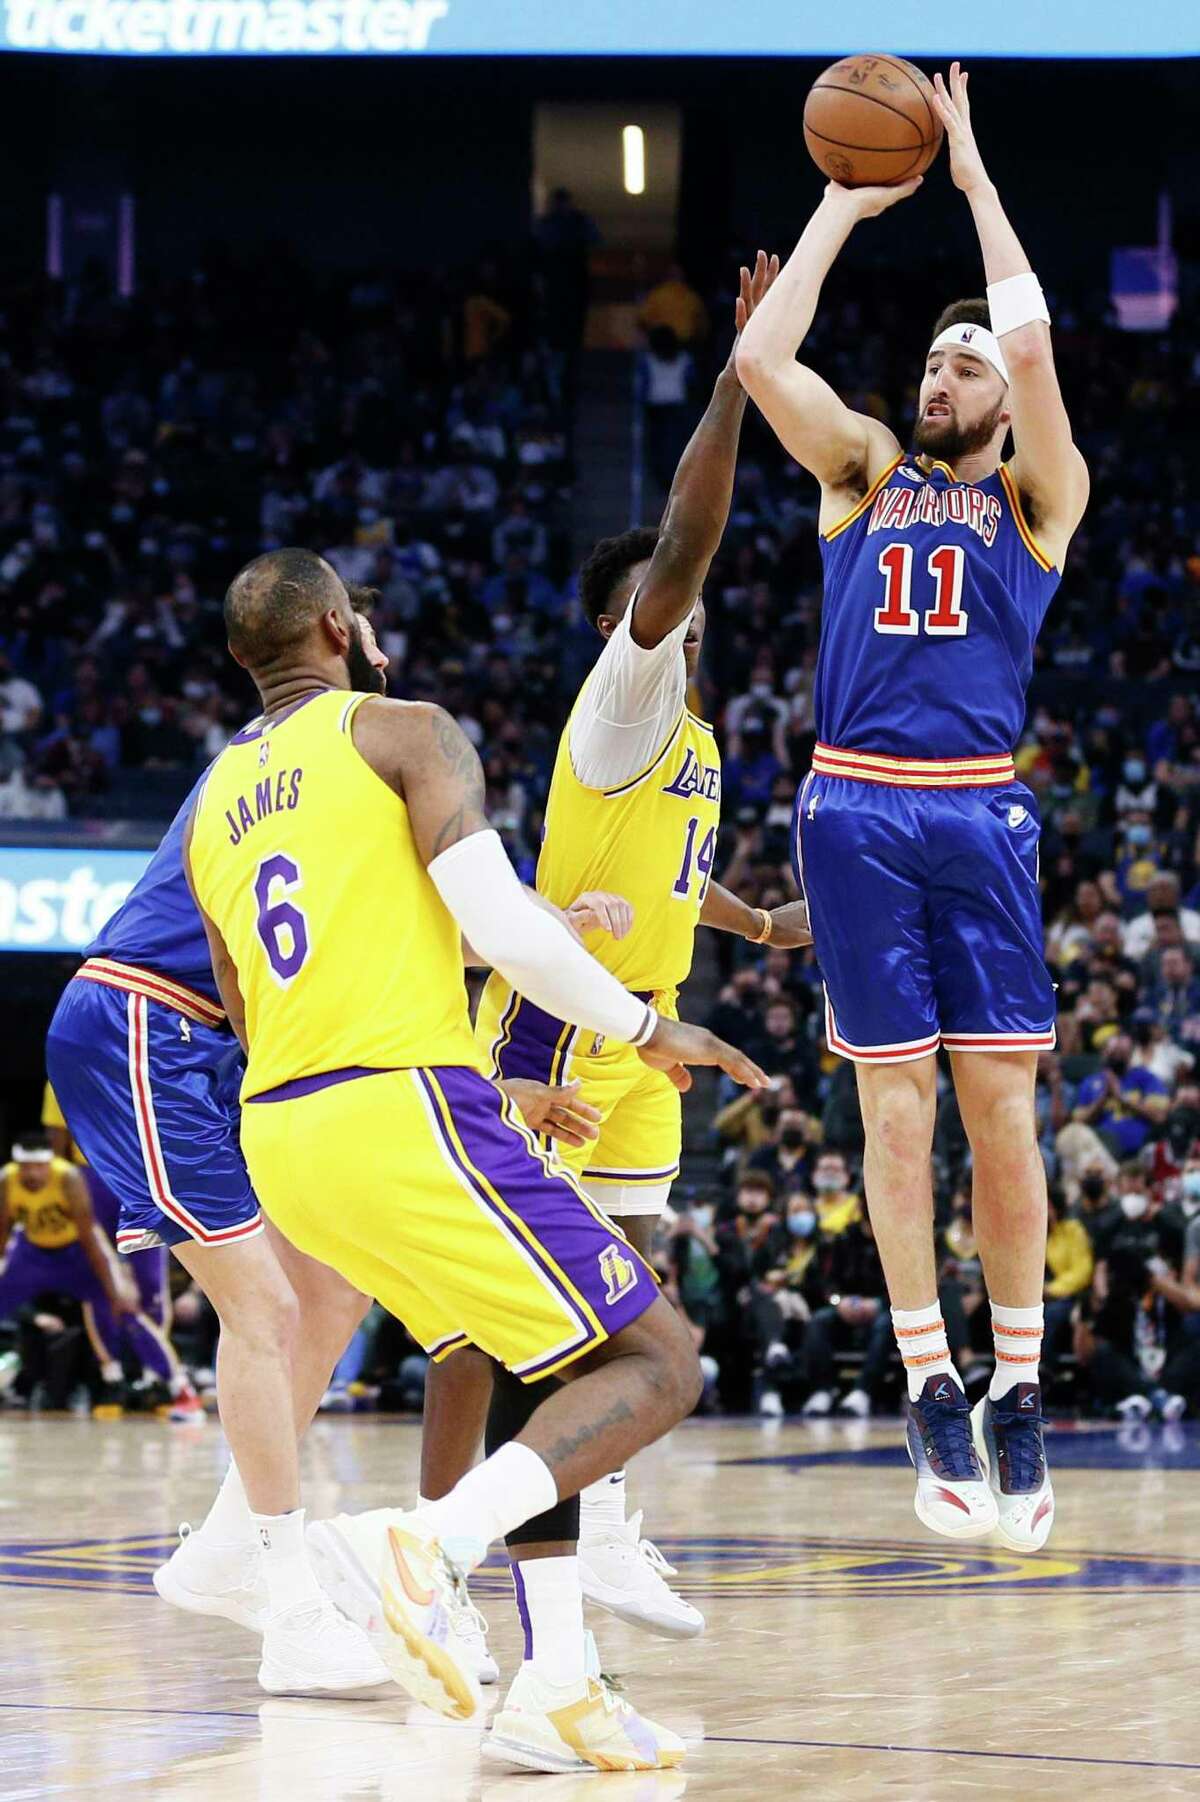 Golden State Warriors guard Klay Thompson (11) attempts a three-point shot against the Los Angeles Lakers in the first half of an NBA game at Chase Center, Saturday, Feb. 12, 2022, in San Francisco, Calif.